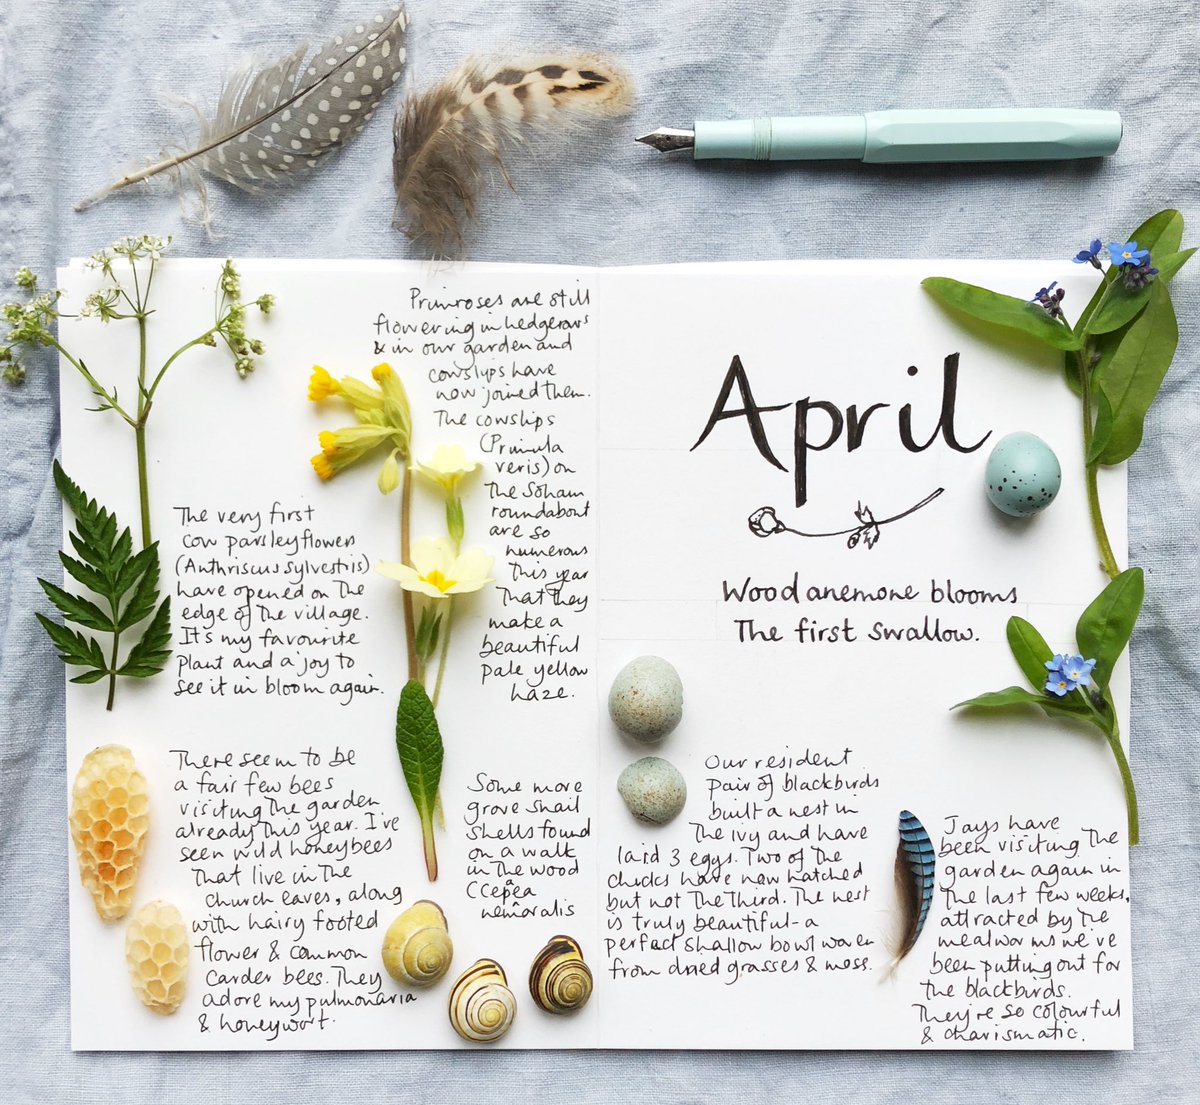 On Saturday morning I'll be listing my new Nature Journal films (April & May). There's be a 60 min film each month of me seeking out beautiful species eg nightingales & cuckoos,making new botanical photos & explaining how even small natureobservations can improve mental health.